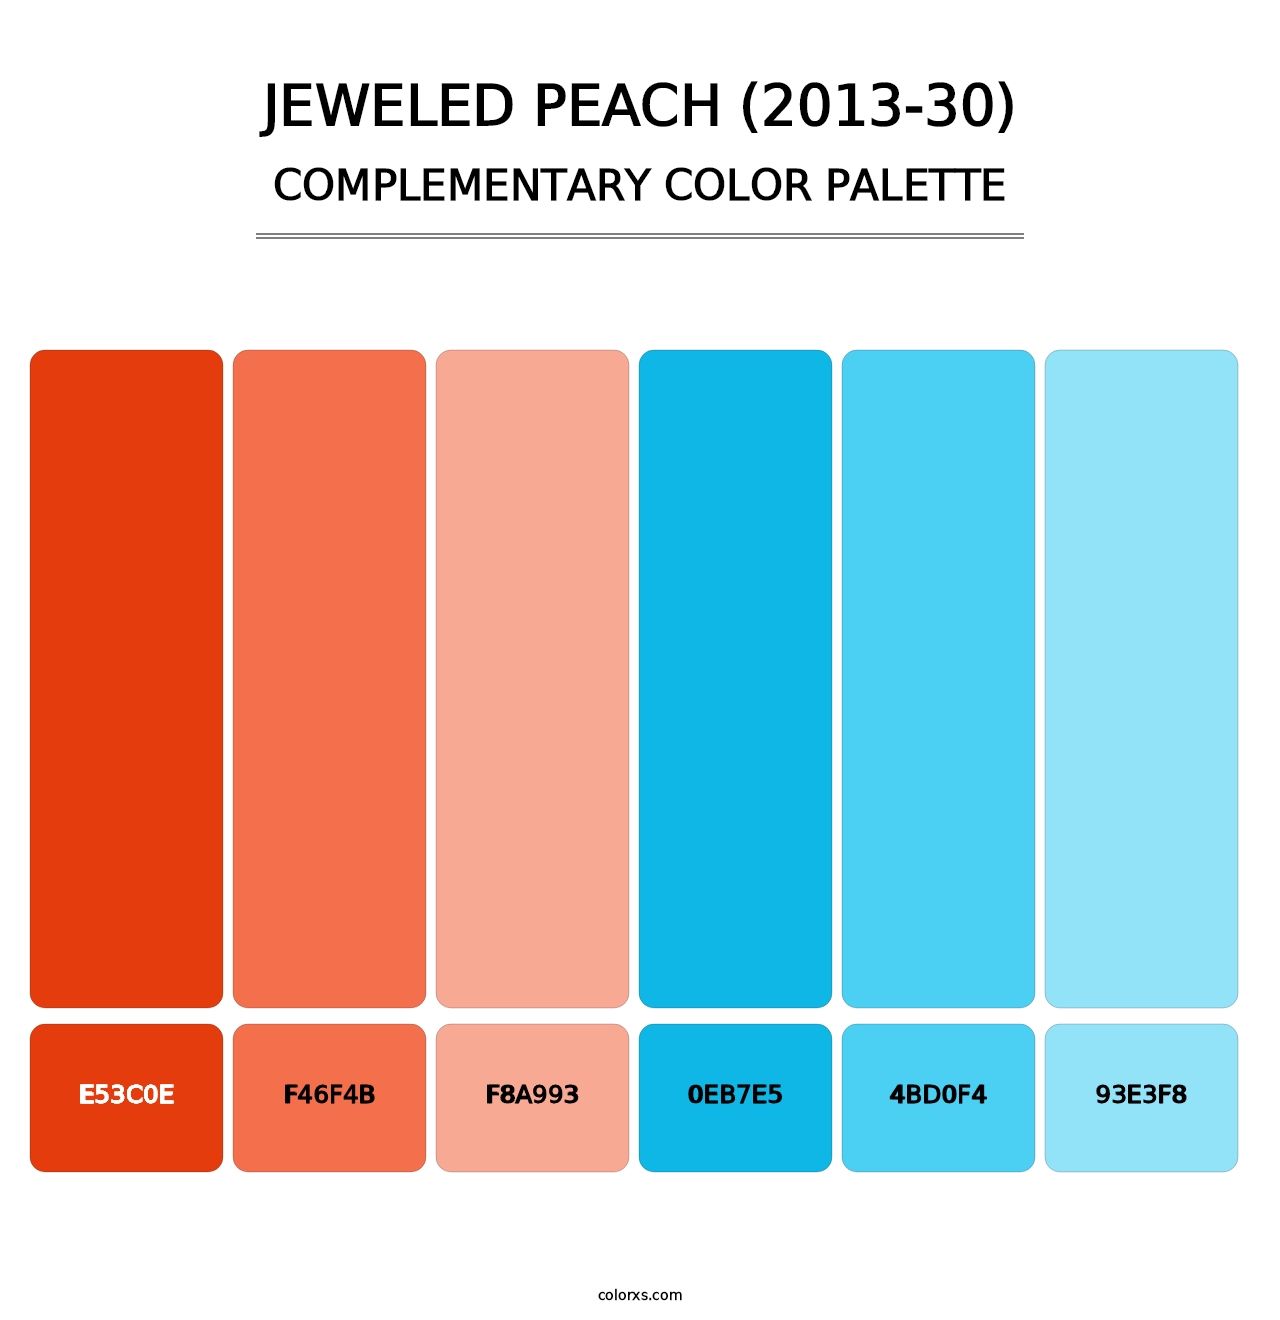 Jeweled Peach (2013-30) - Complementary Color Palette